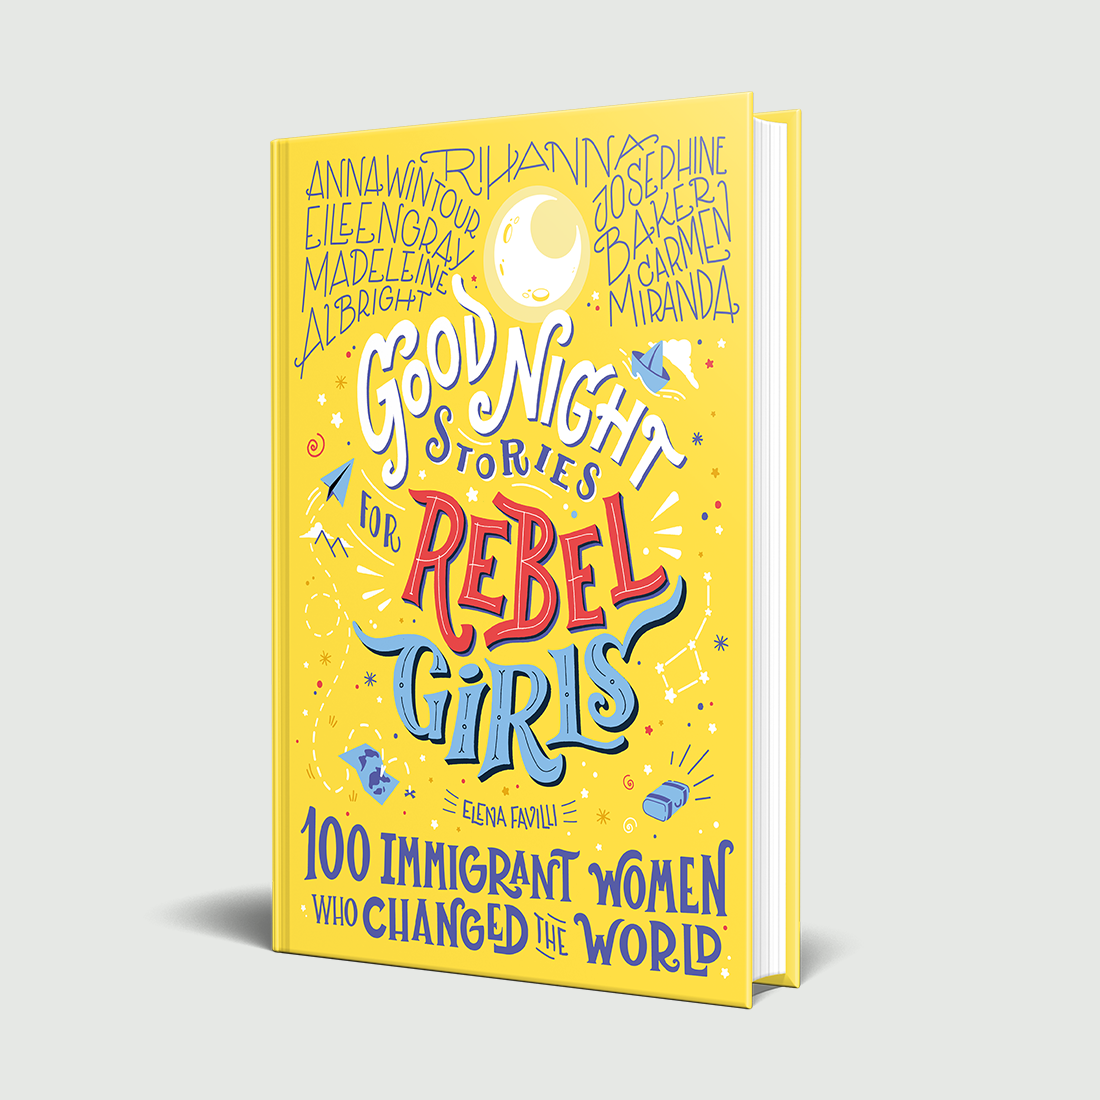 Rebel Girls - GOOD NIGHT STORIES FOR REBEL GIRLS: 100 IMMIGRANT WOMEN WHO CHANGED THE WORLD